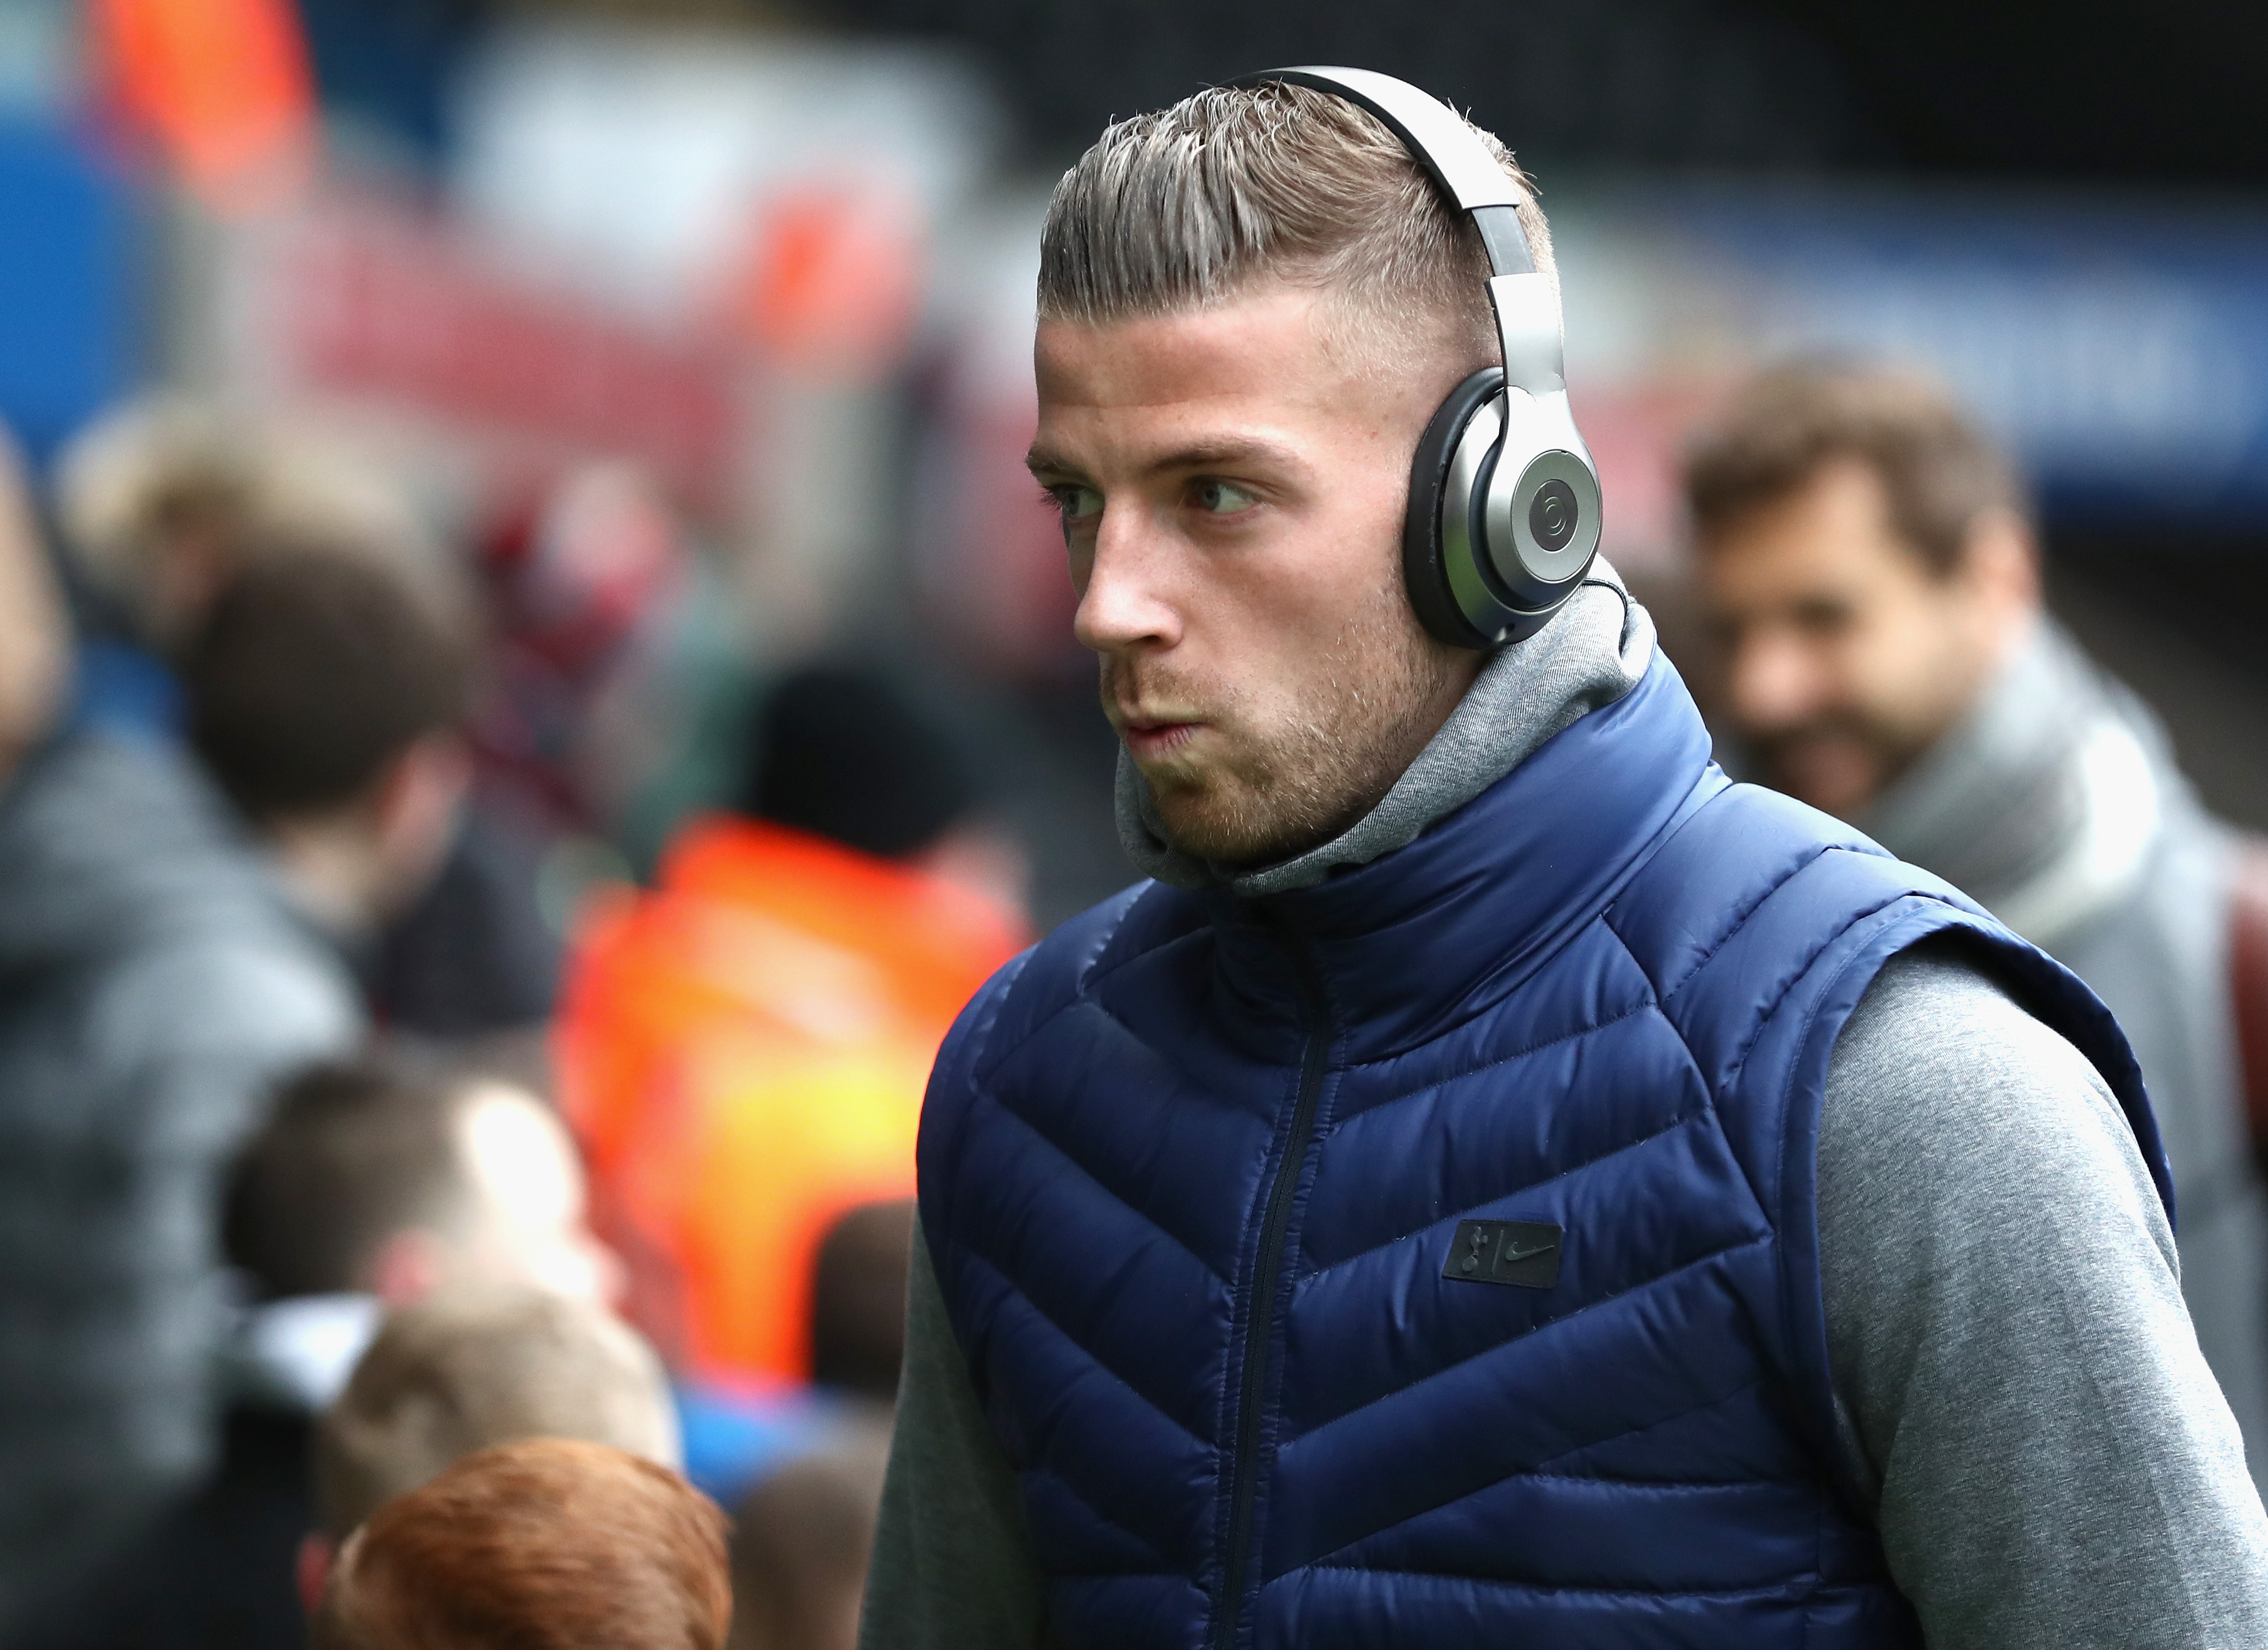 SWANSEA, WALES - MARCH 17:  Toby Alderweireld of Spura arrives prior to The Emirates FA Cup Quarter Final match between Swansea City and Tottenham Hotspur at Liberty Stadium on March 17, 2018 in Swansea, Wales.  (Photo by Catherine Ivill/Getty Images)